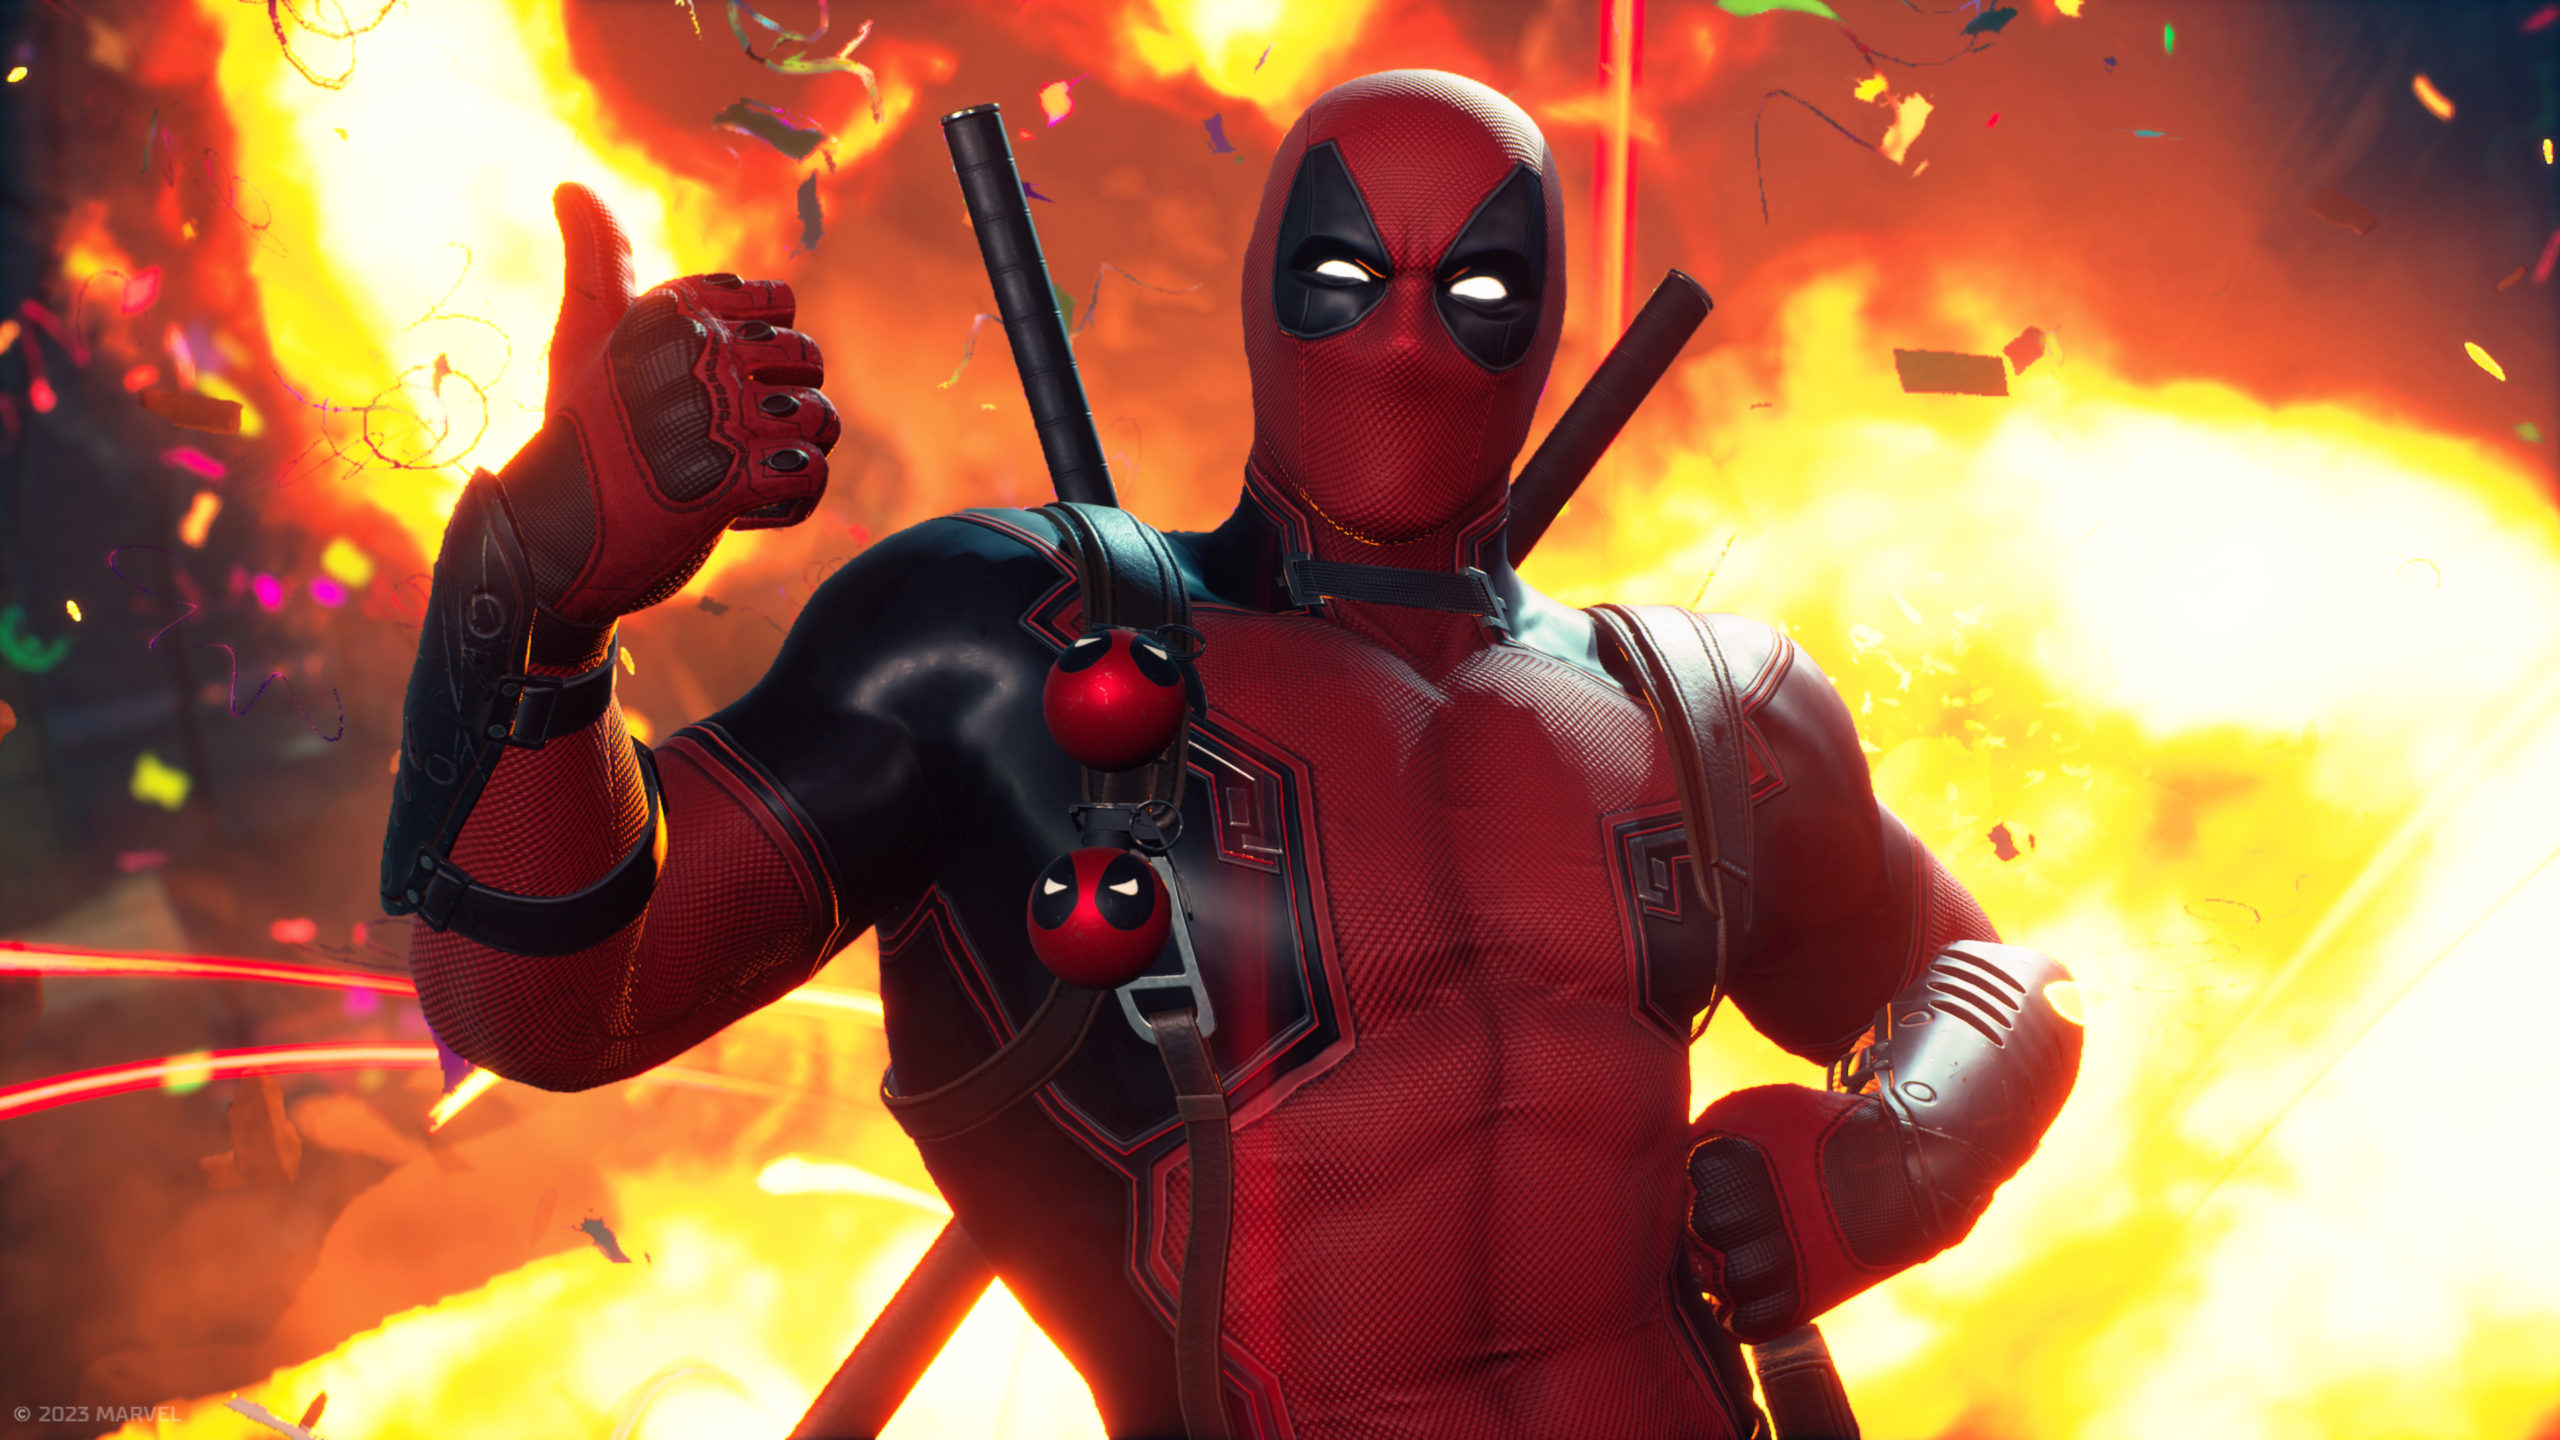 Deadpool arrives in Marvel’s Midnight Suns, brings chimichangas